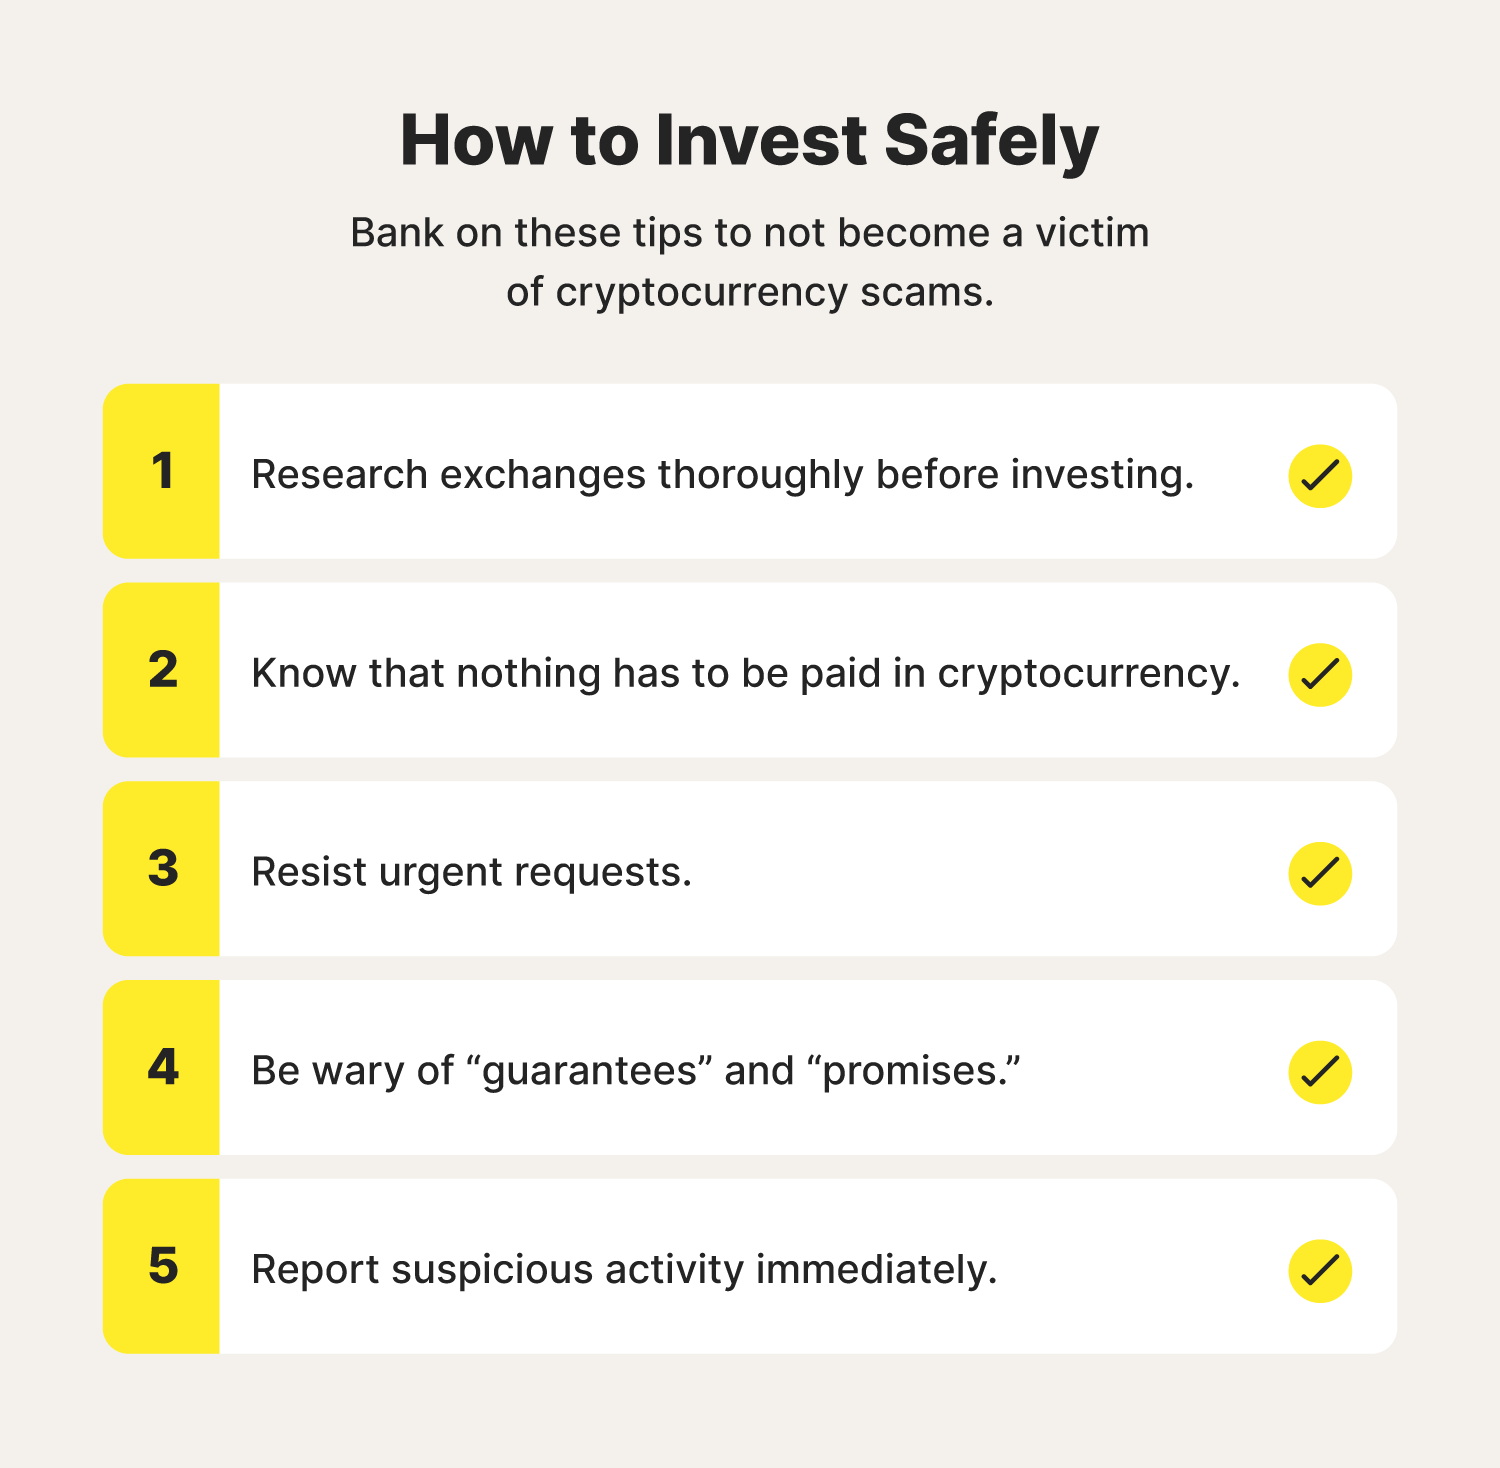 Five icons help list tips to help avoid cryptocurrency scams online.  